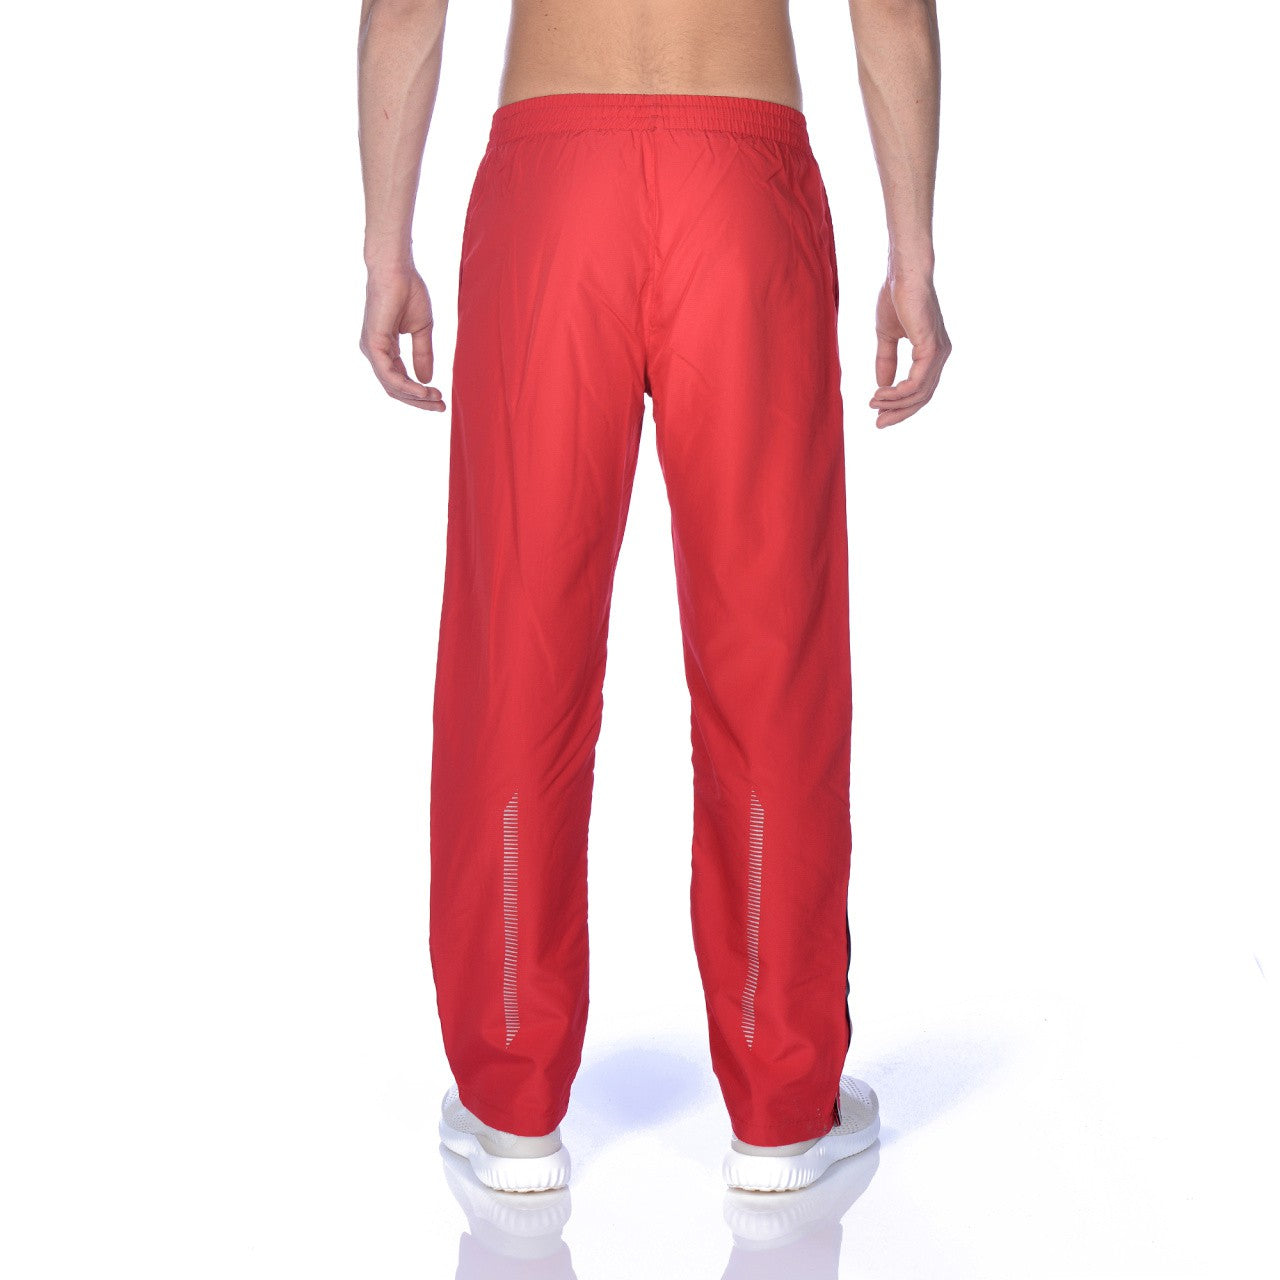 Tl Warm Up Pant red